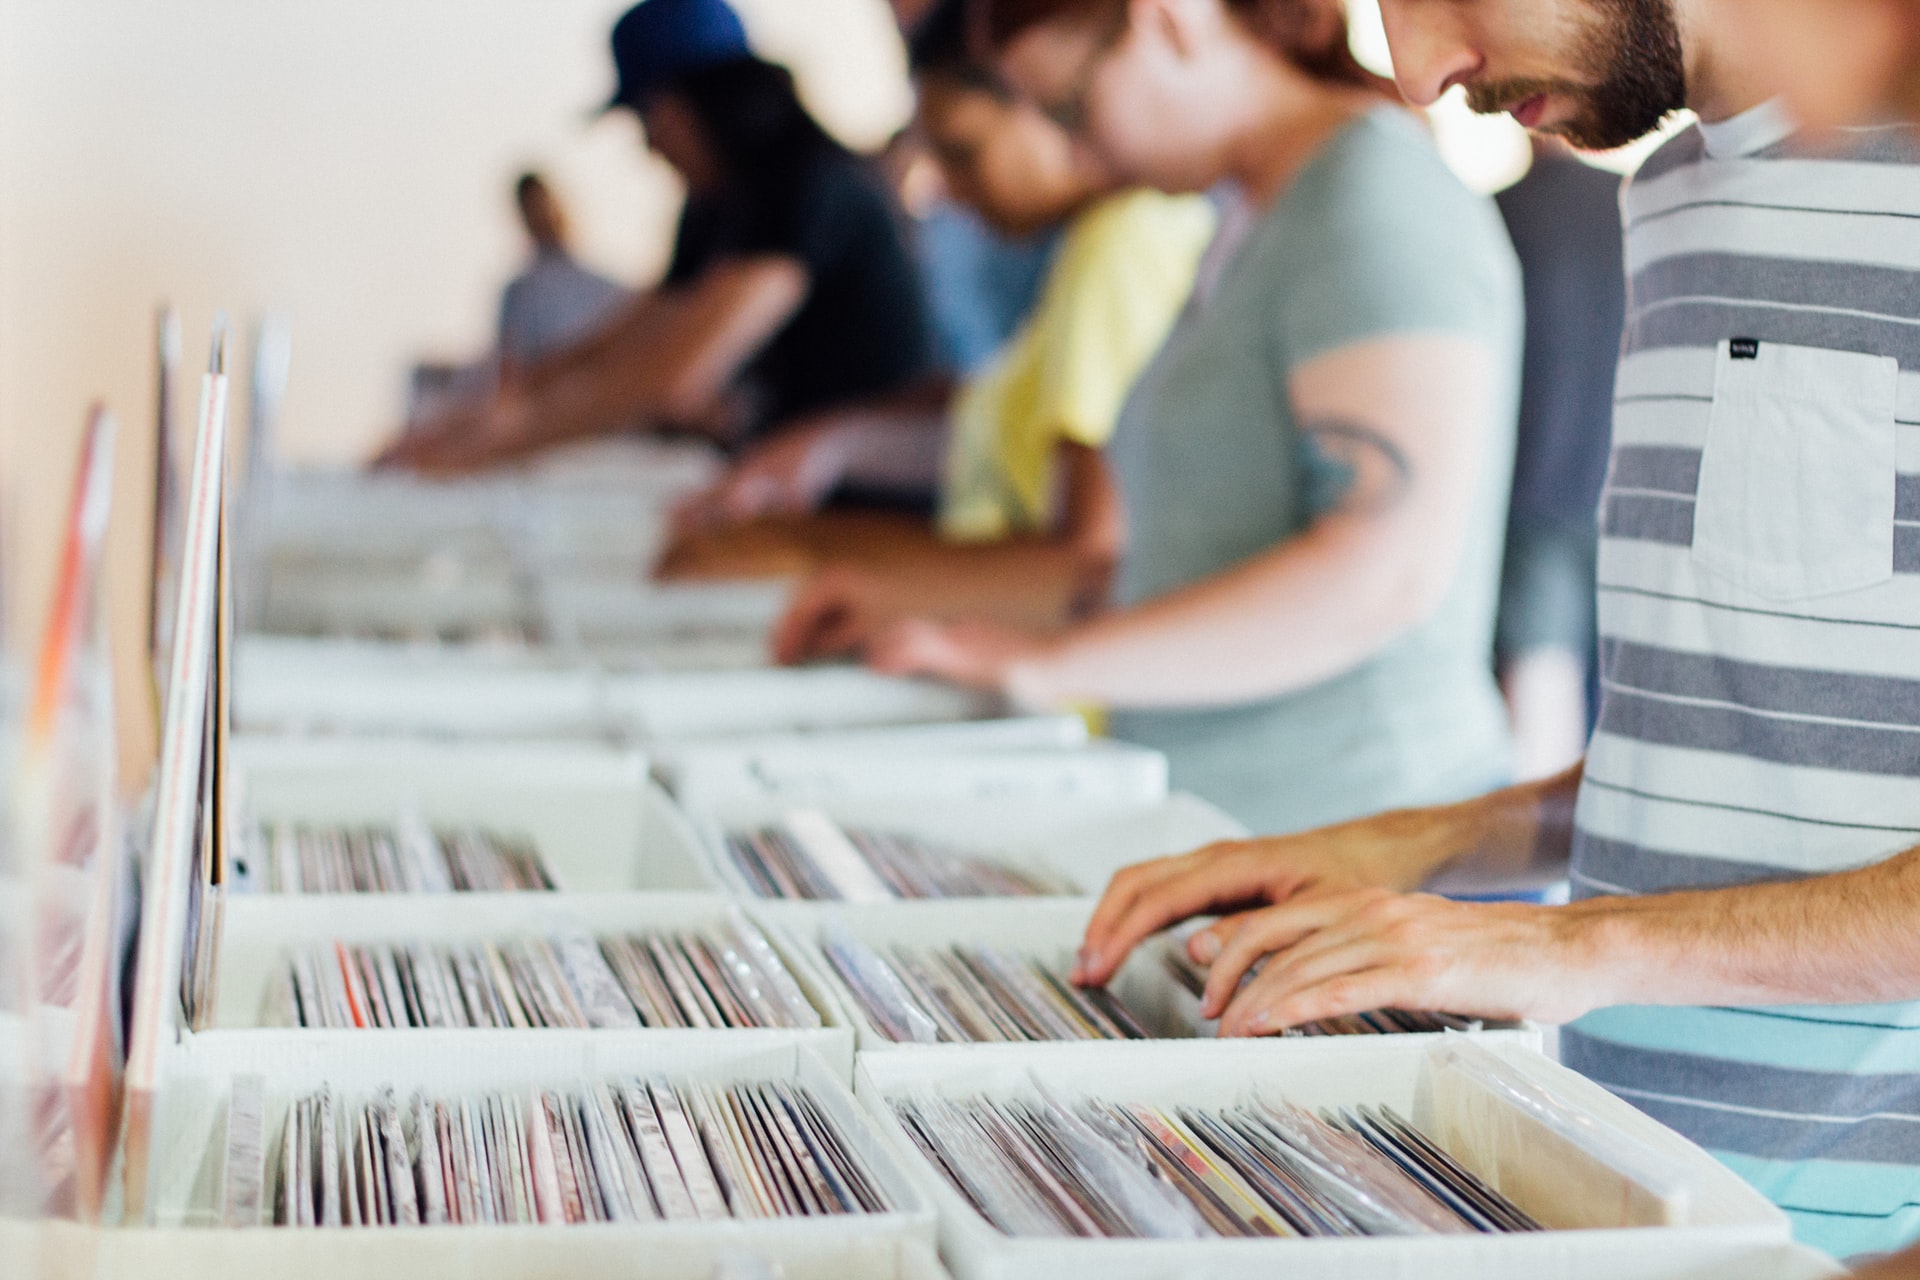 People searching through records